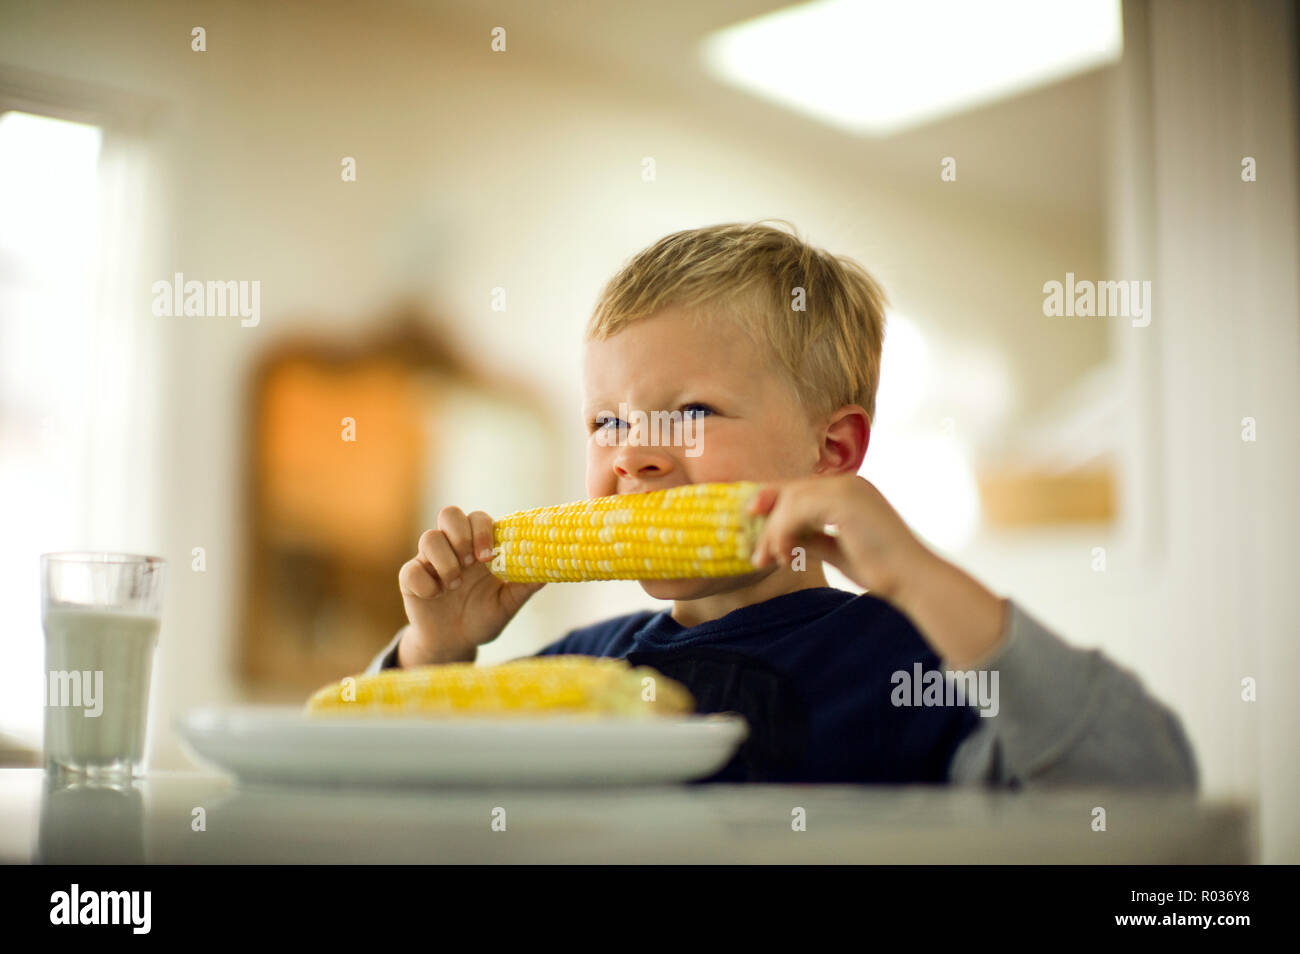 Young boy takes a bite from a cob of sweetcorn as he sits at a dining table. Stock Photo